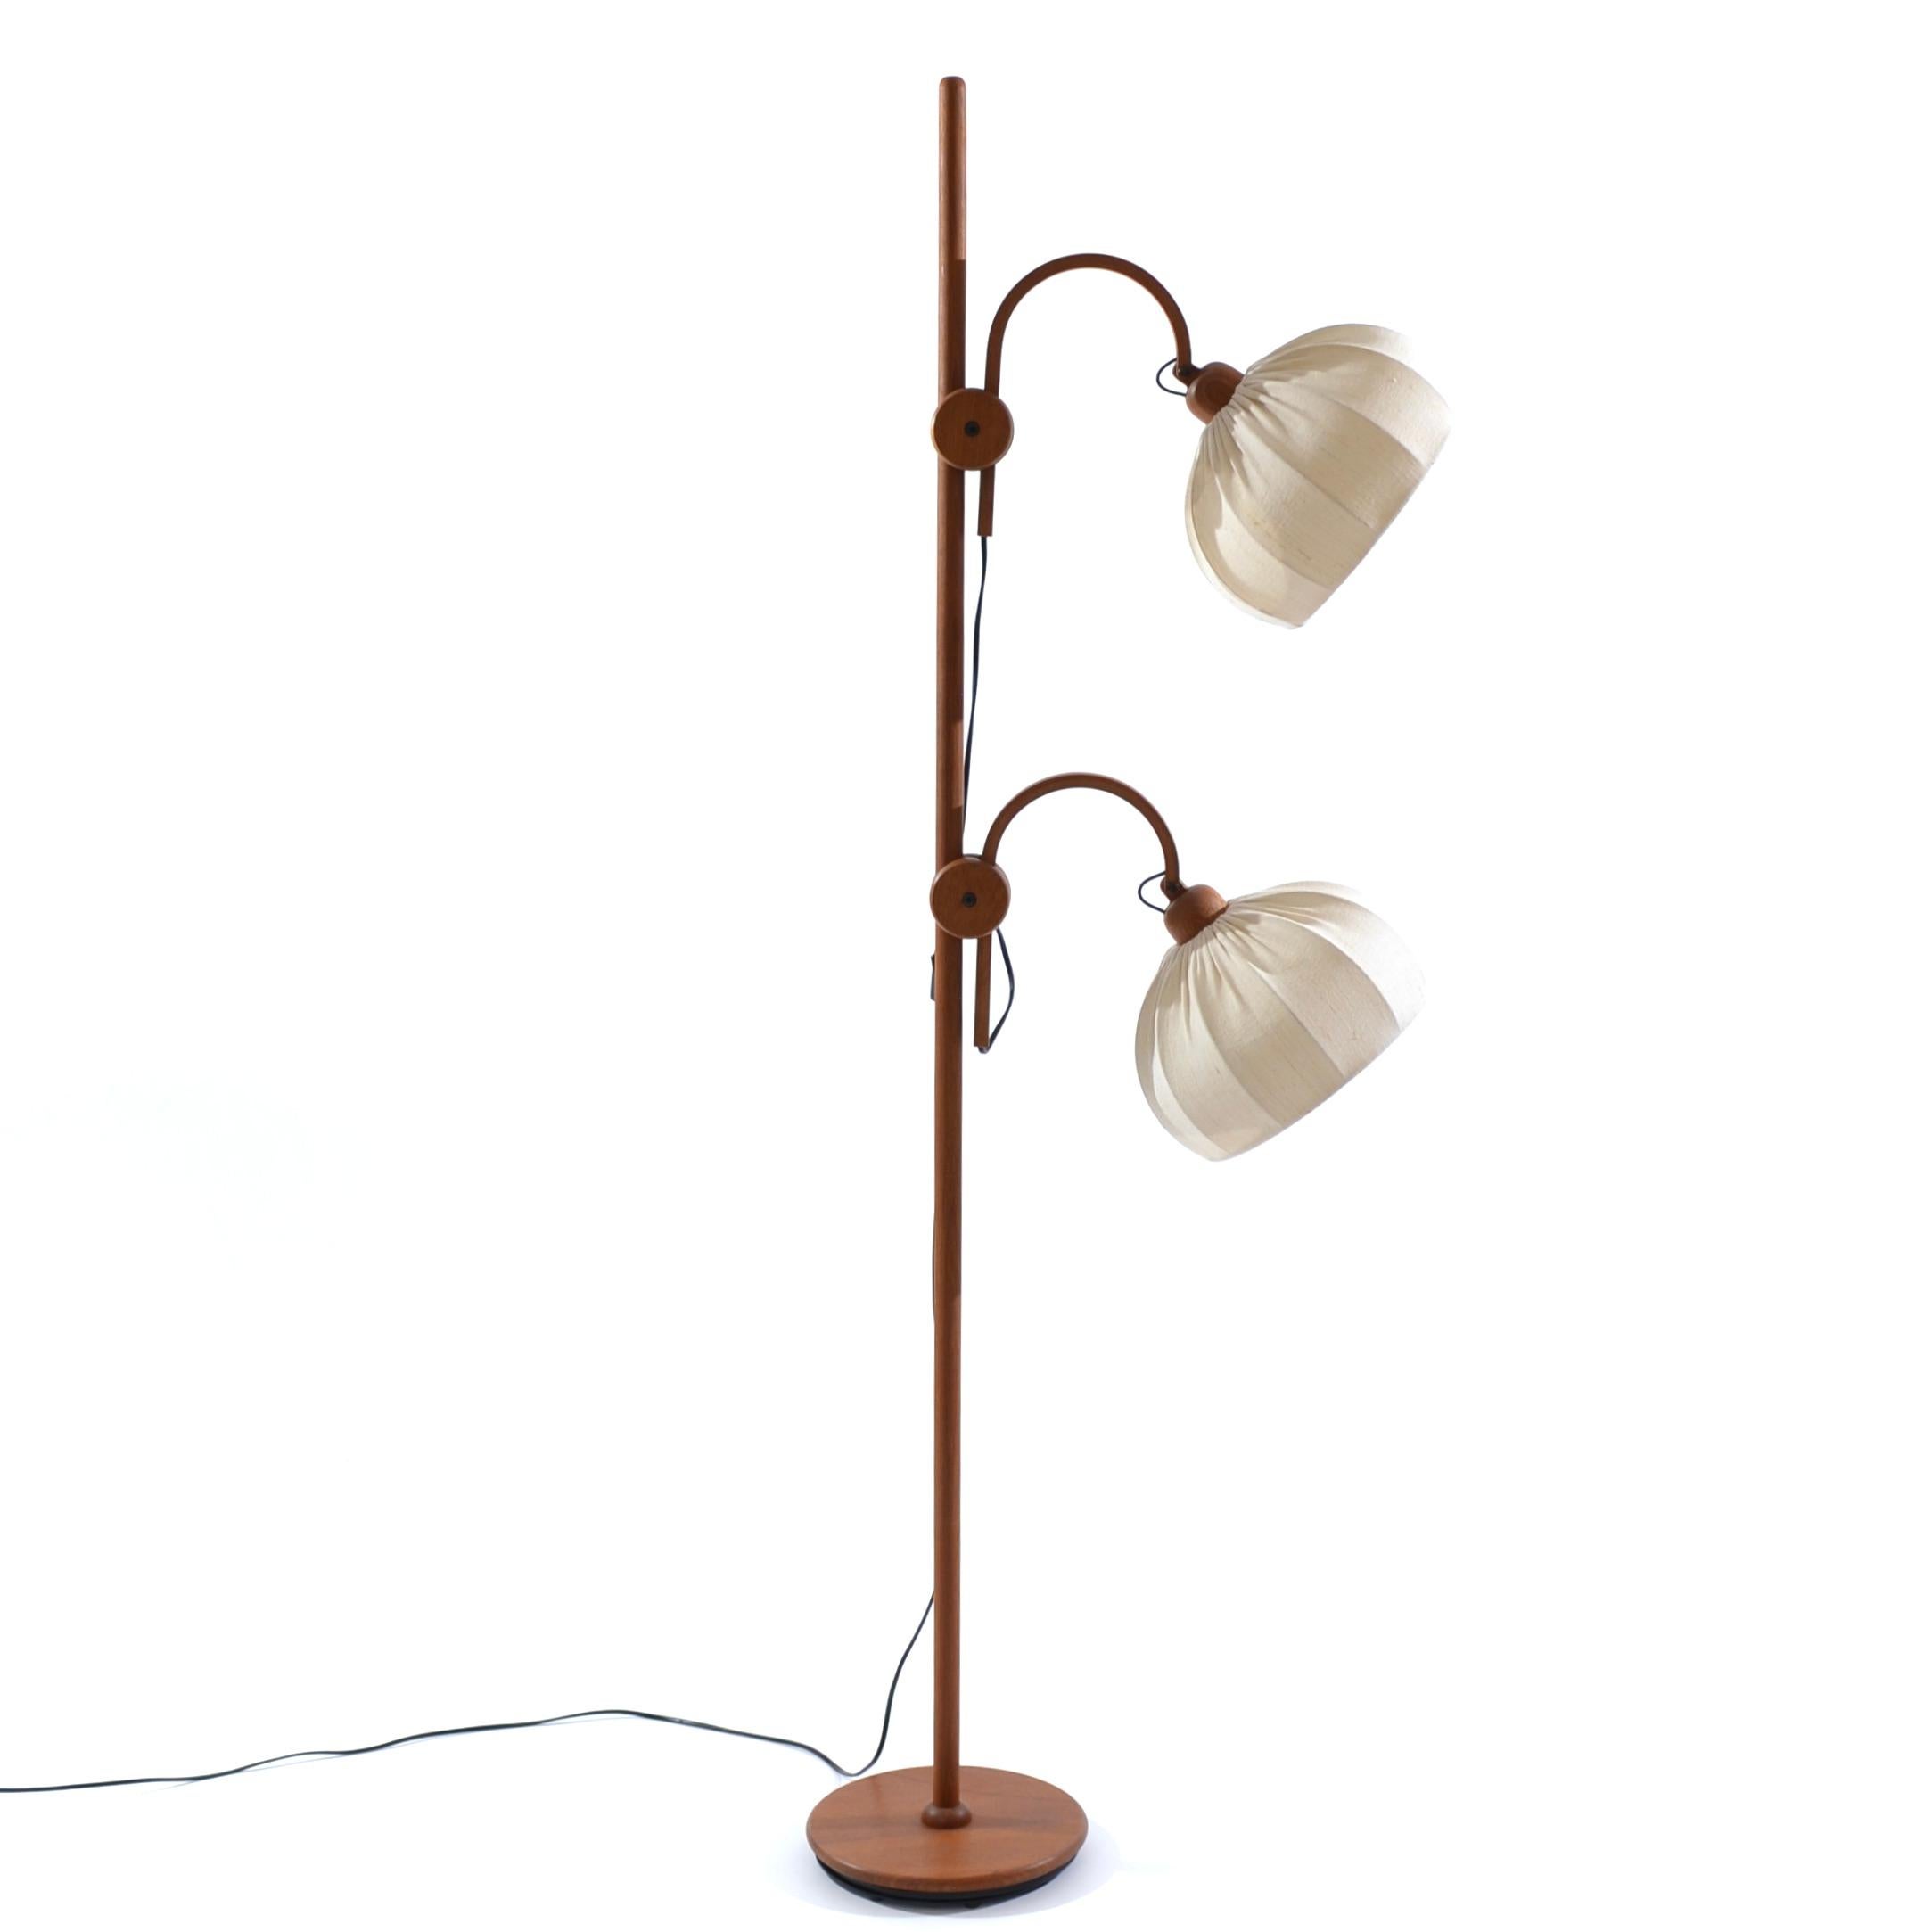 Up, down, left, right...

From the Domus factory founded in 1966 near Hanover, this ingenious floor lamp will be articulated at your convenience to warmly shine in the living room.

Its basket lampshades are in heather cotton.